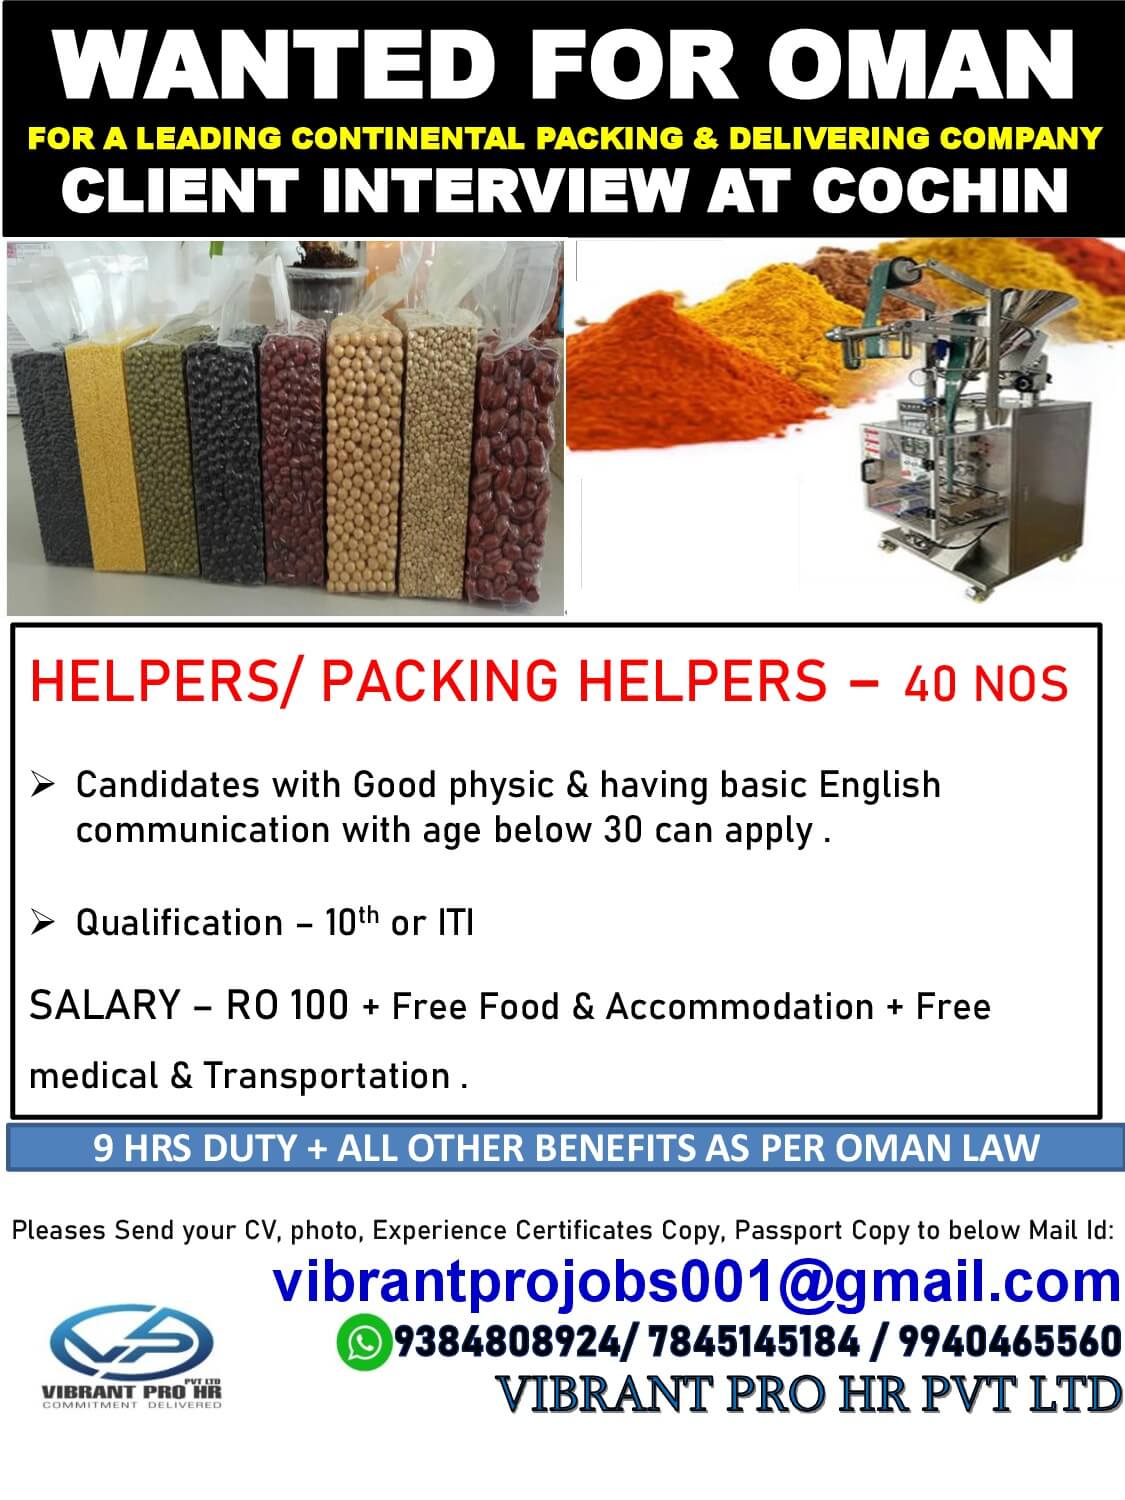 WANTED FOR OMAN- FOR A LEADING CONTINENTAL PACKING & DELIVERING COMPANY- CLIENT INTERVIEW AT COCHIN